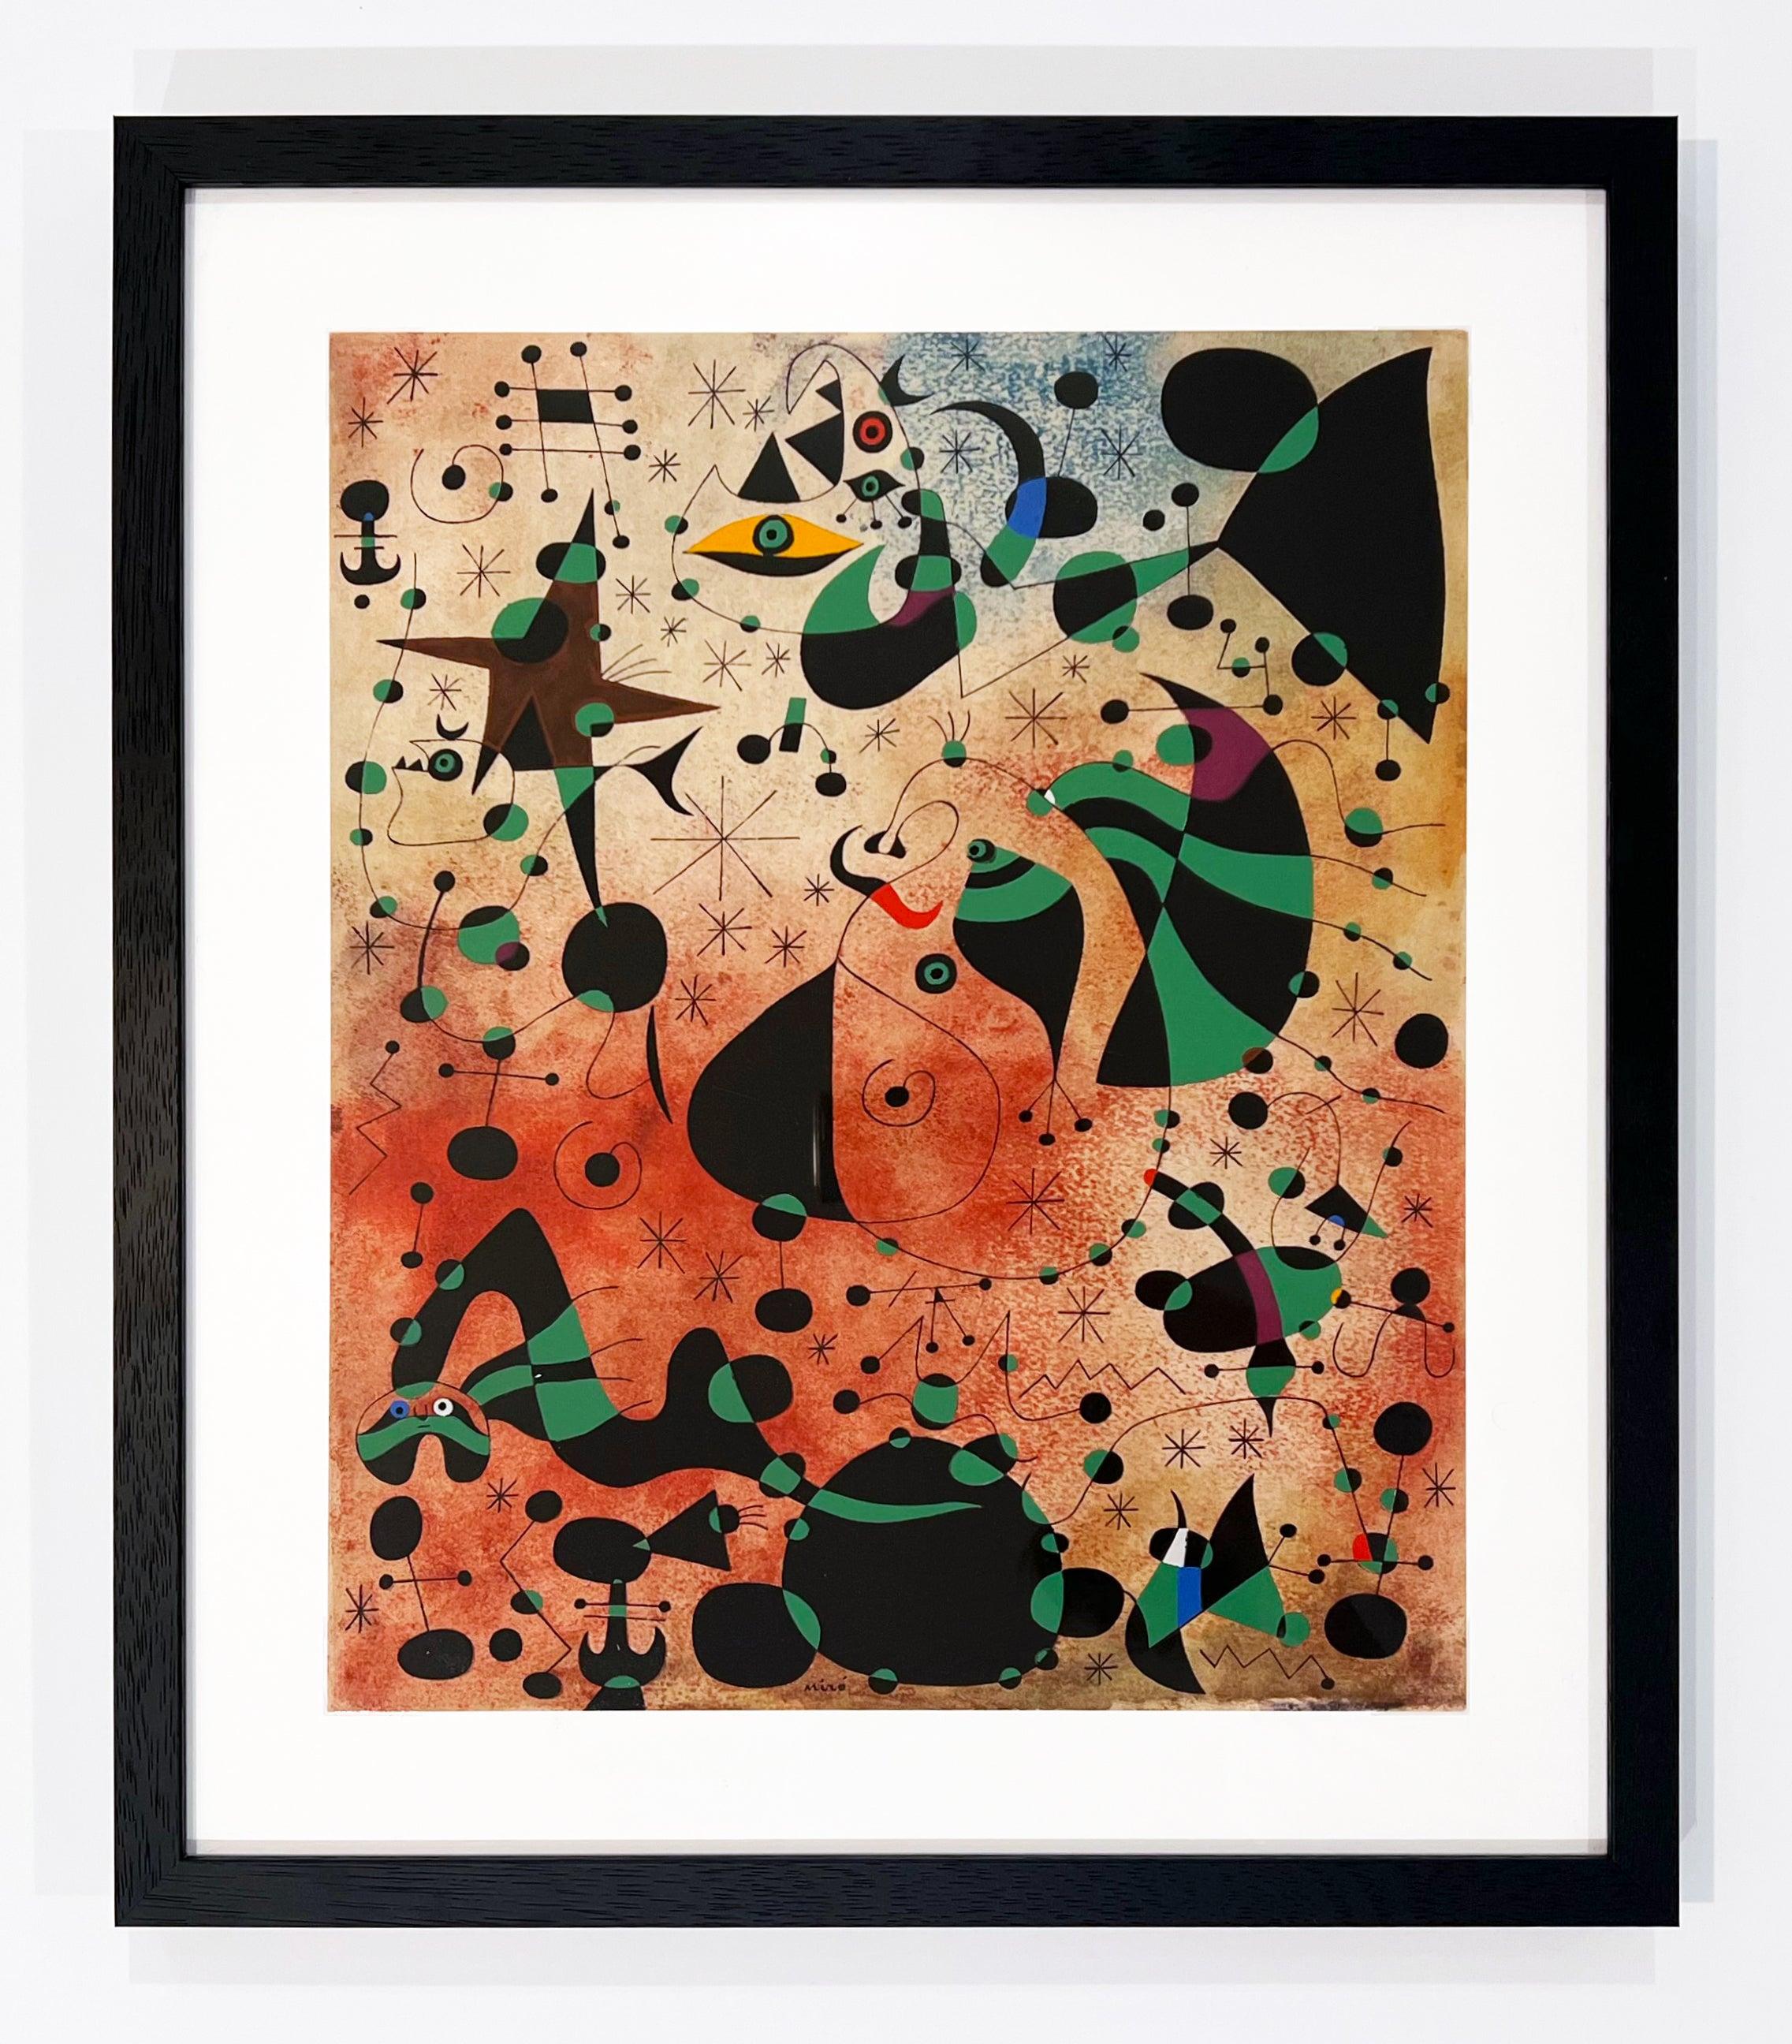 Joan Miro (after) Plate XXII from 1959 Constellations - Print by (after) Joan Miró